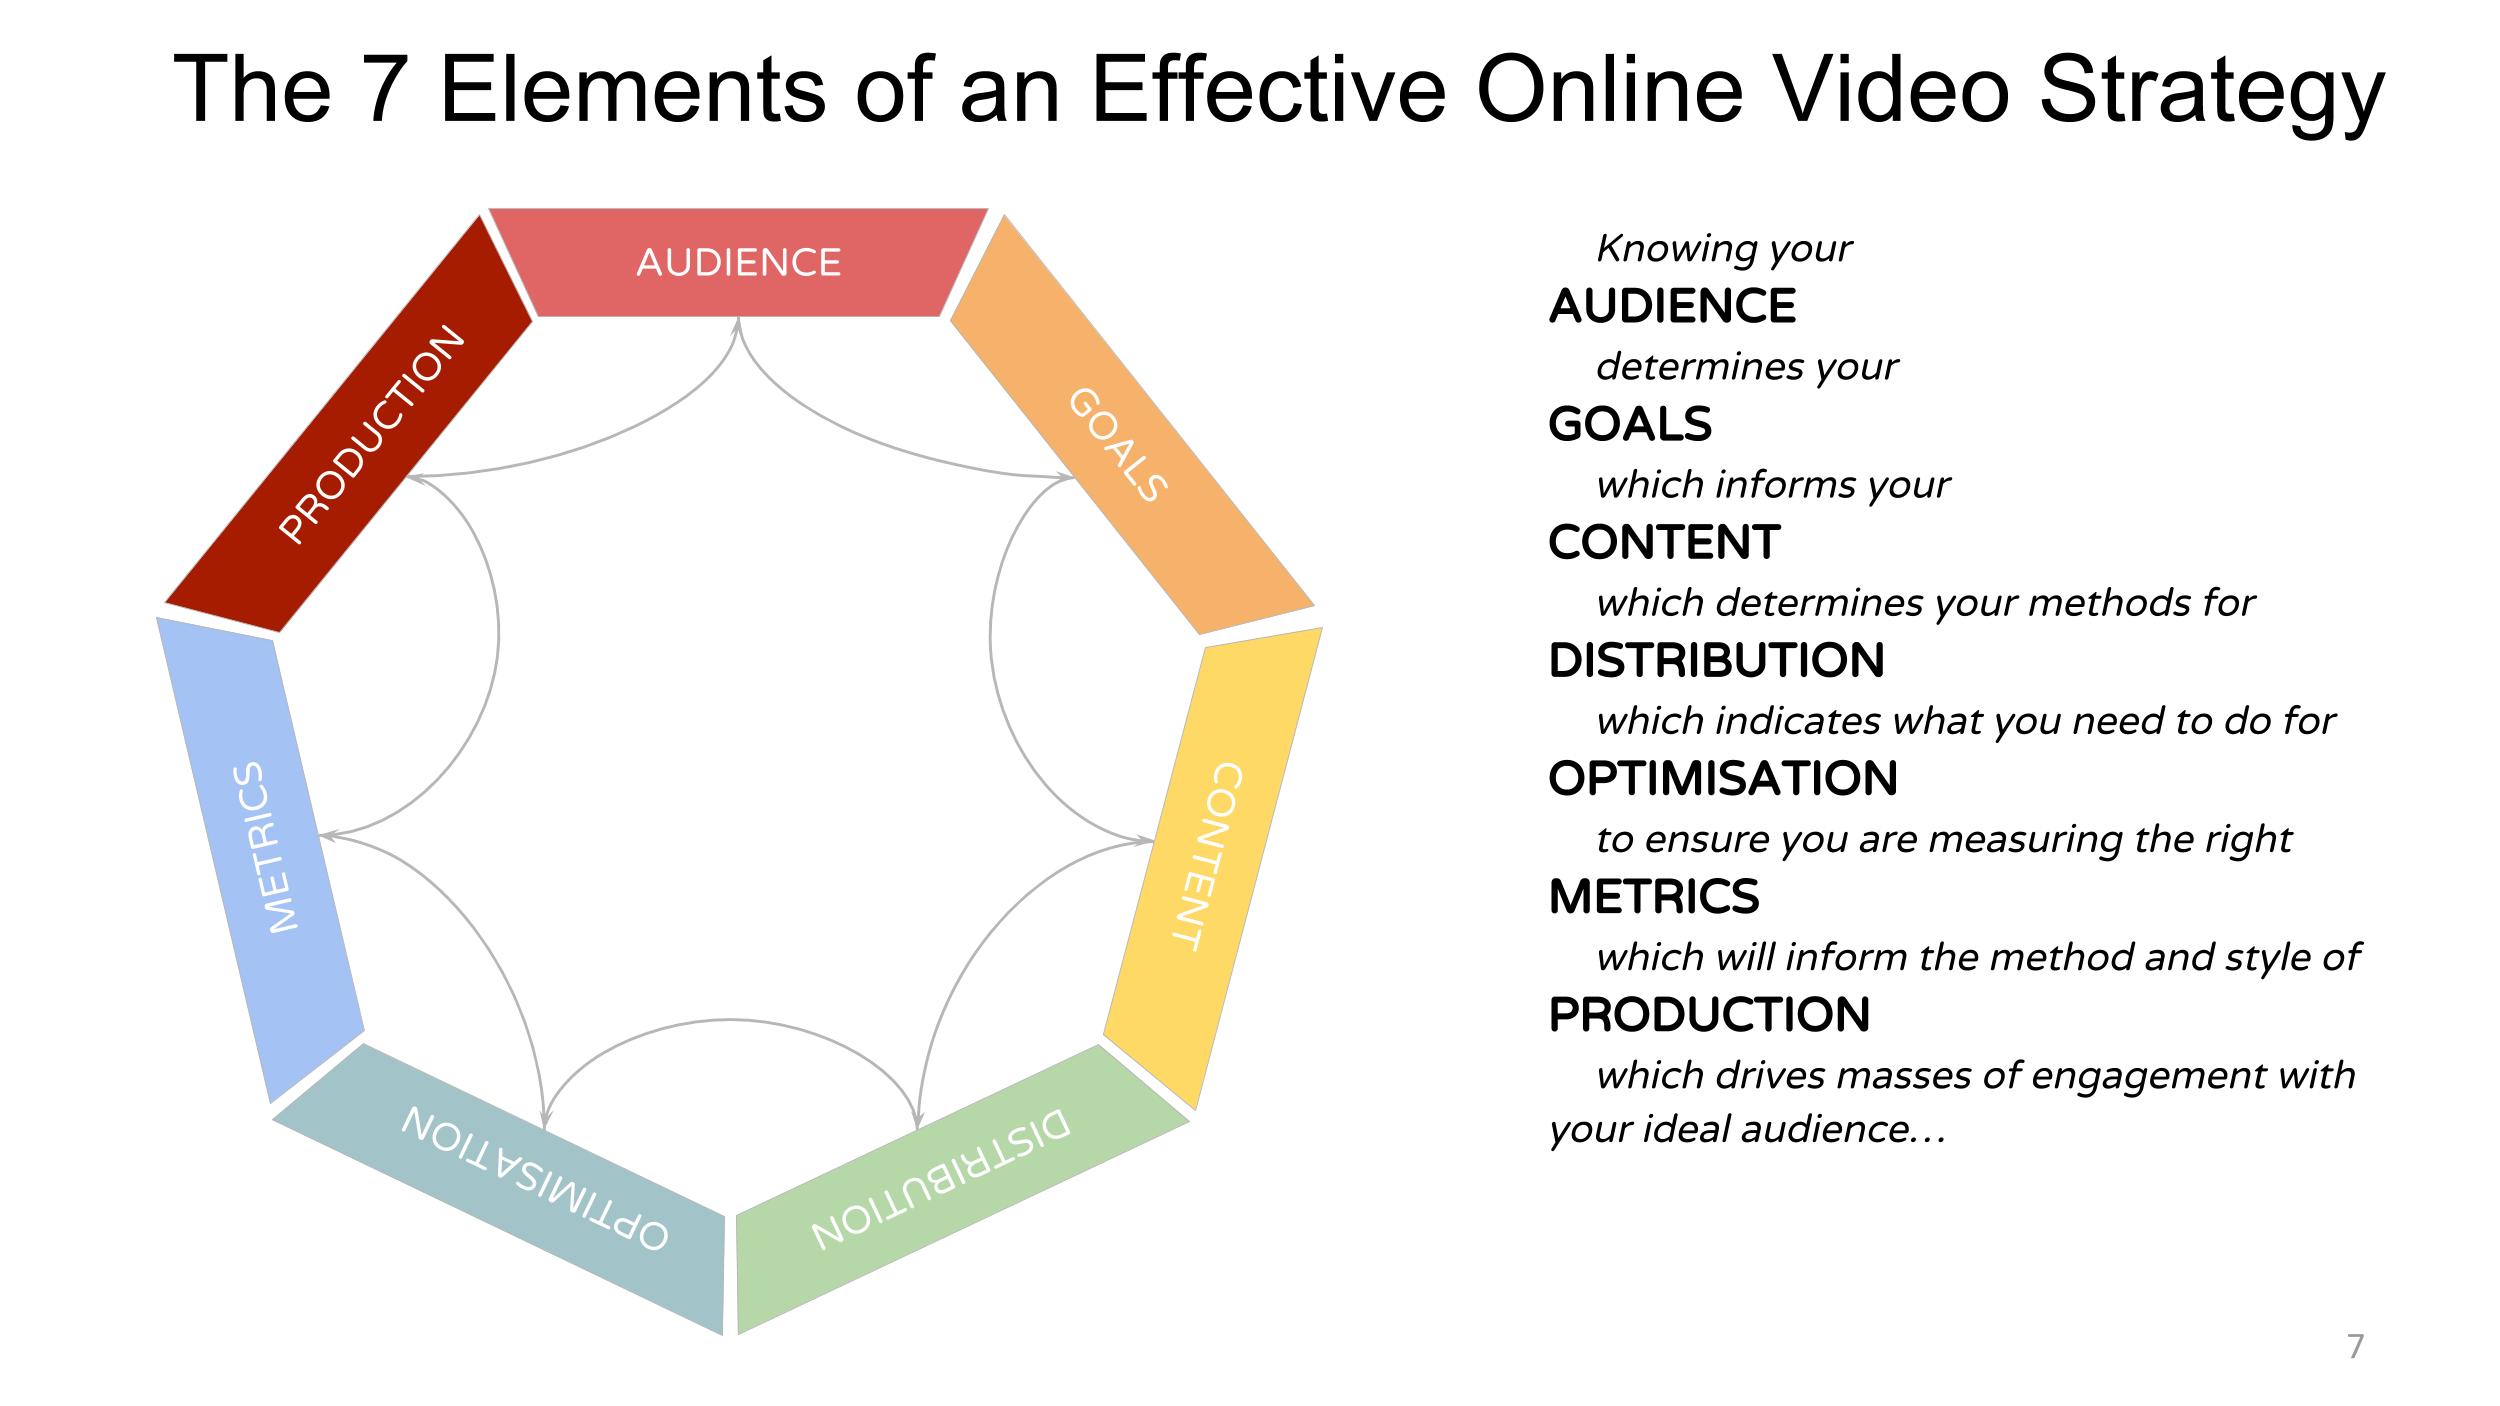 Workshop // Developing Your Online Video Strategy